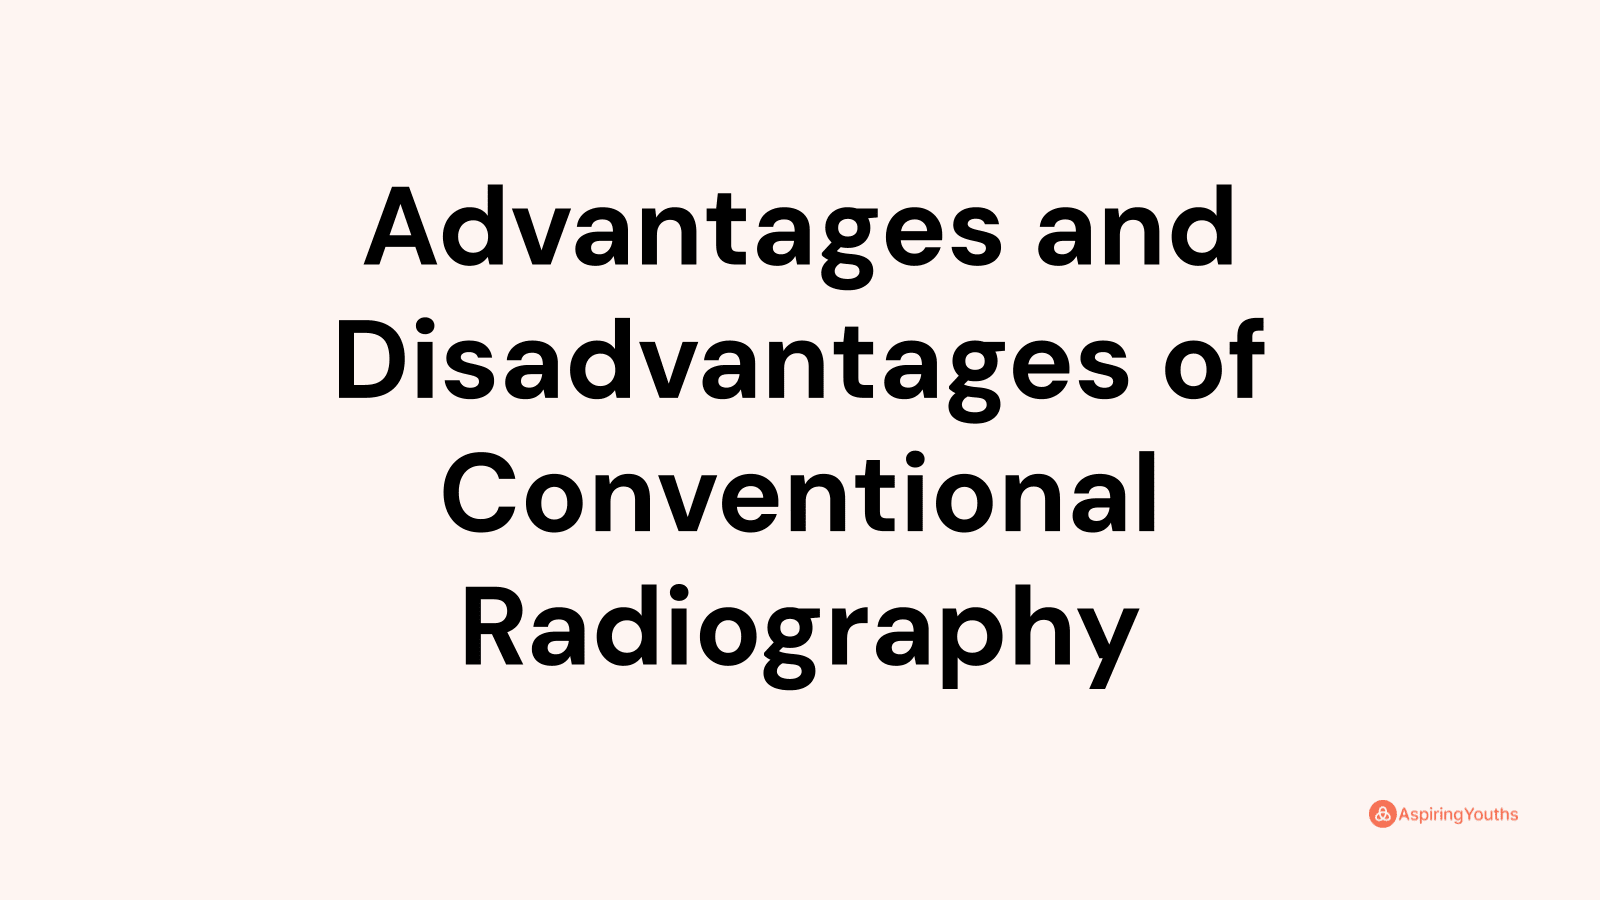 Advantages and disadvantages of Conventional Radiography